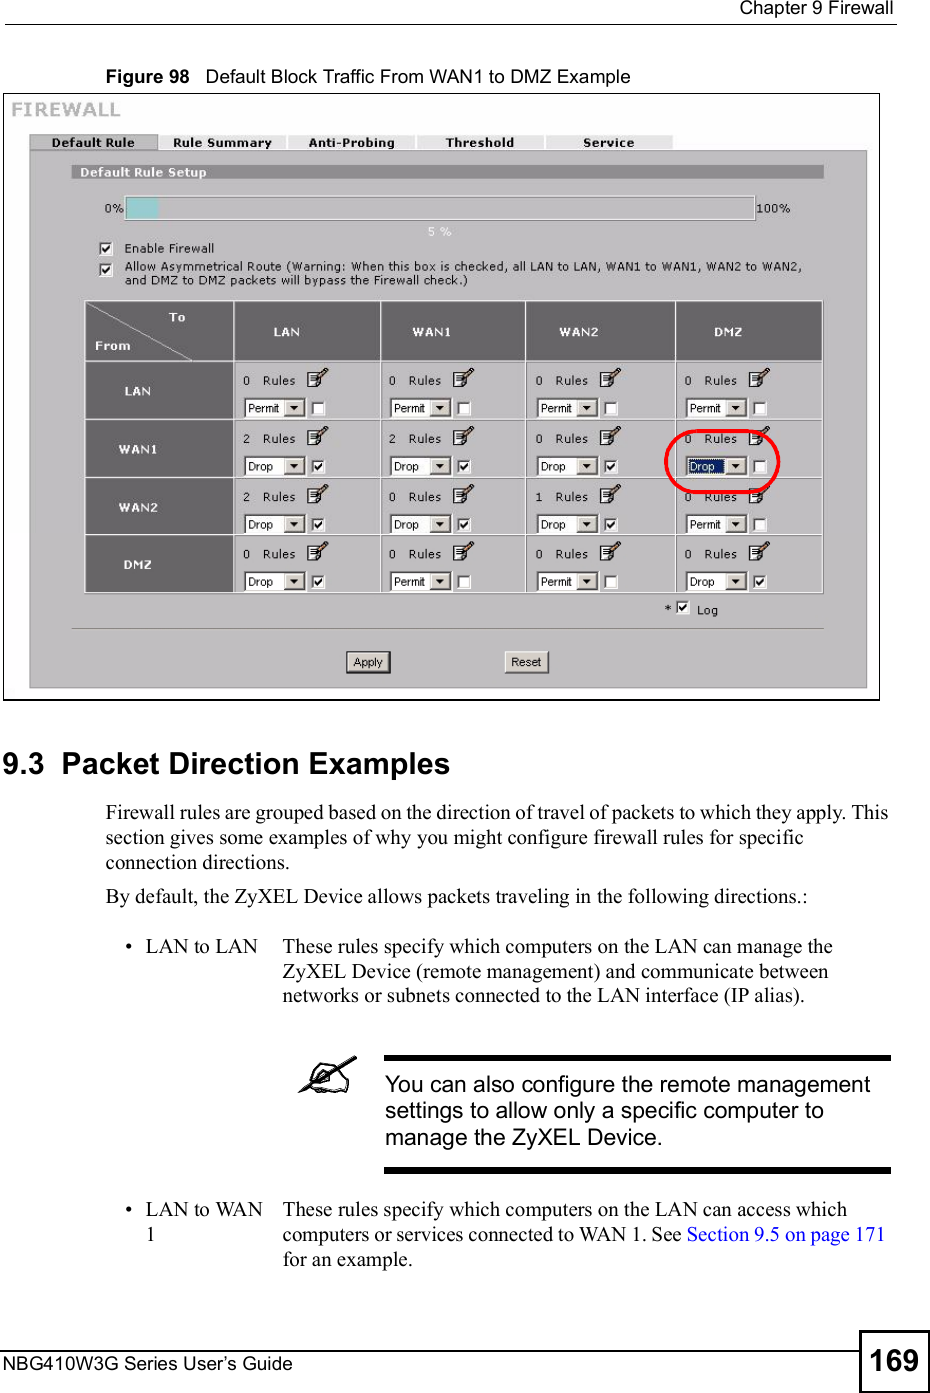  Chapter 9FirewallNBG410W3G Series User s Guide 169Figure 98   Default Block Traffic From WAN1 to DMZ Example    9.3  Packet Direction ExamplesFirewall rules are grouped based on the direction of travel of packets to which they apply. This section gives some examples of why you might configure firewall rules for specific connection directions. By default, the ZyXEL Device allows packets traveling in the following directions.: LAN to LANThese rules specify which computers on the LAN can manage the ZyXEL Device (remote management) and communicate between networks or subnets connected to the LAN interface (IP alias). You can also configure the remote management settings to allow only a specific computer to manage the ZyXEL Device. LAN to WAN 1These rules specify which computers on the LAN can access which computers or services connected to WAN 1. See Section 9.5 on page 171 for an example.